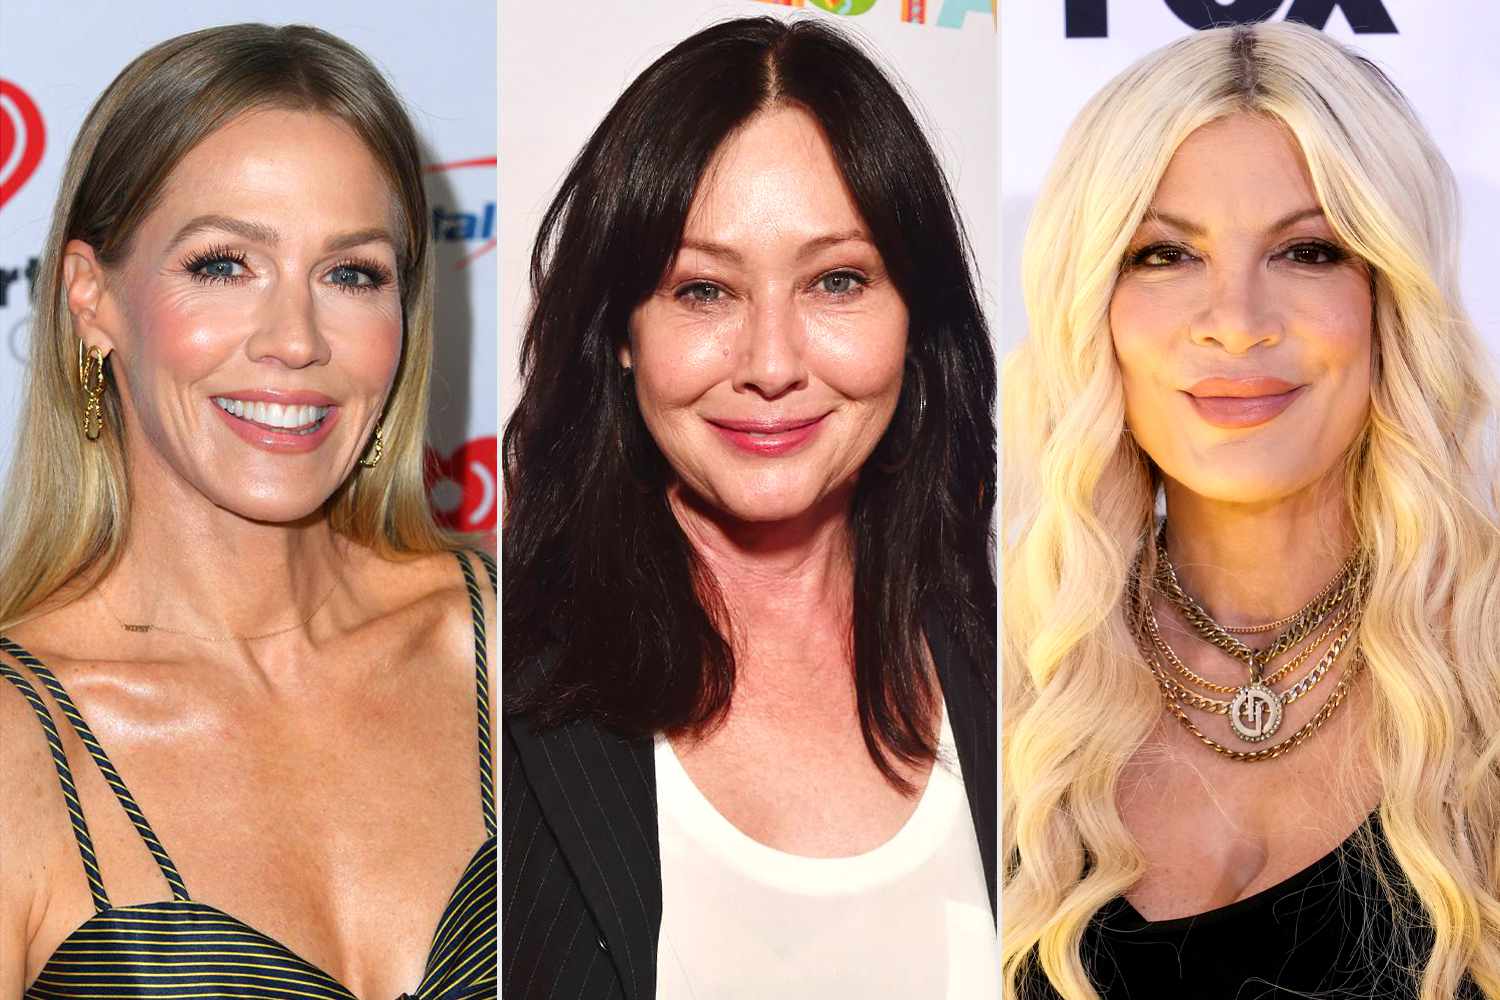 Jennie Garth and Tori Spelling Share Emotional Tributes to Late 'Beverly Hills, 90210' Costar Shannen Doherty: 'My Heart Breaks'